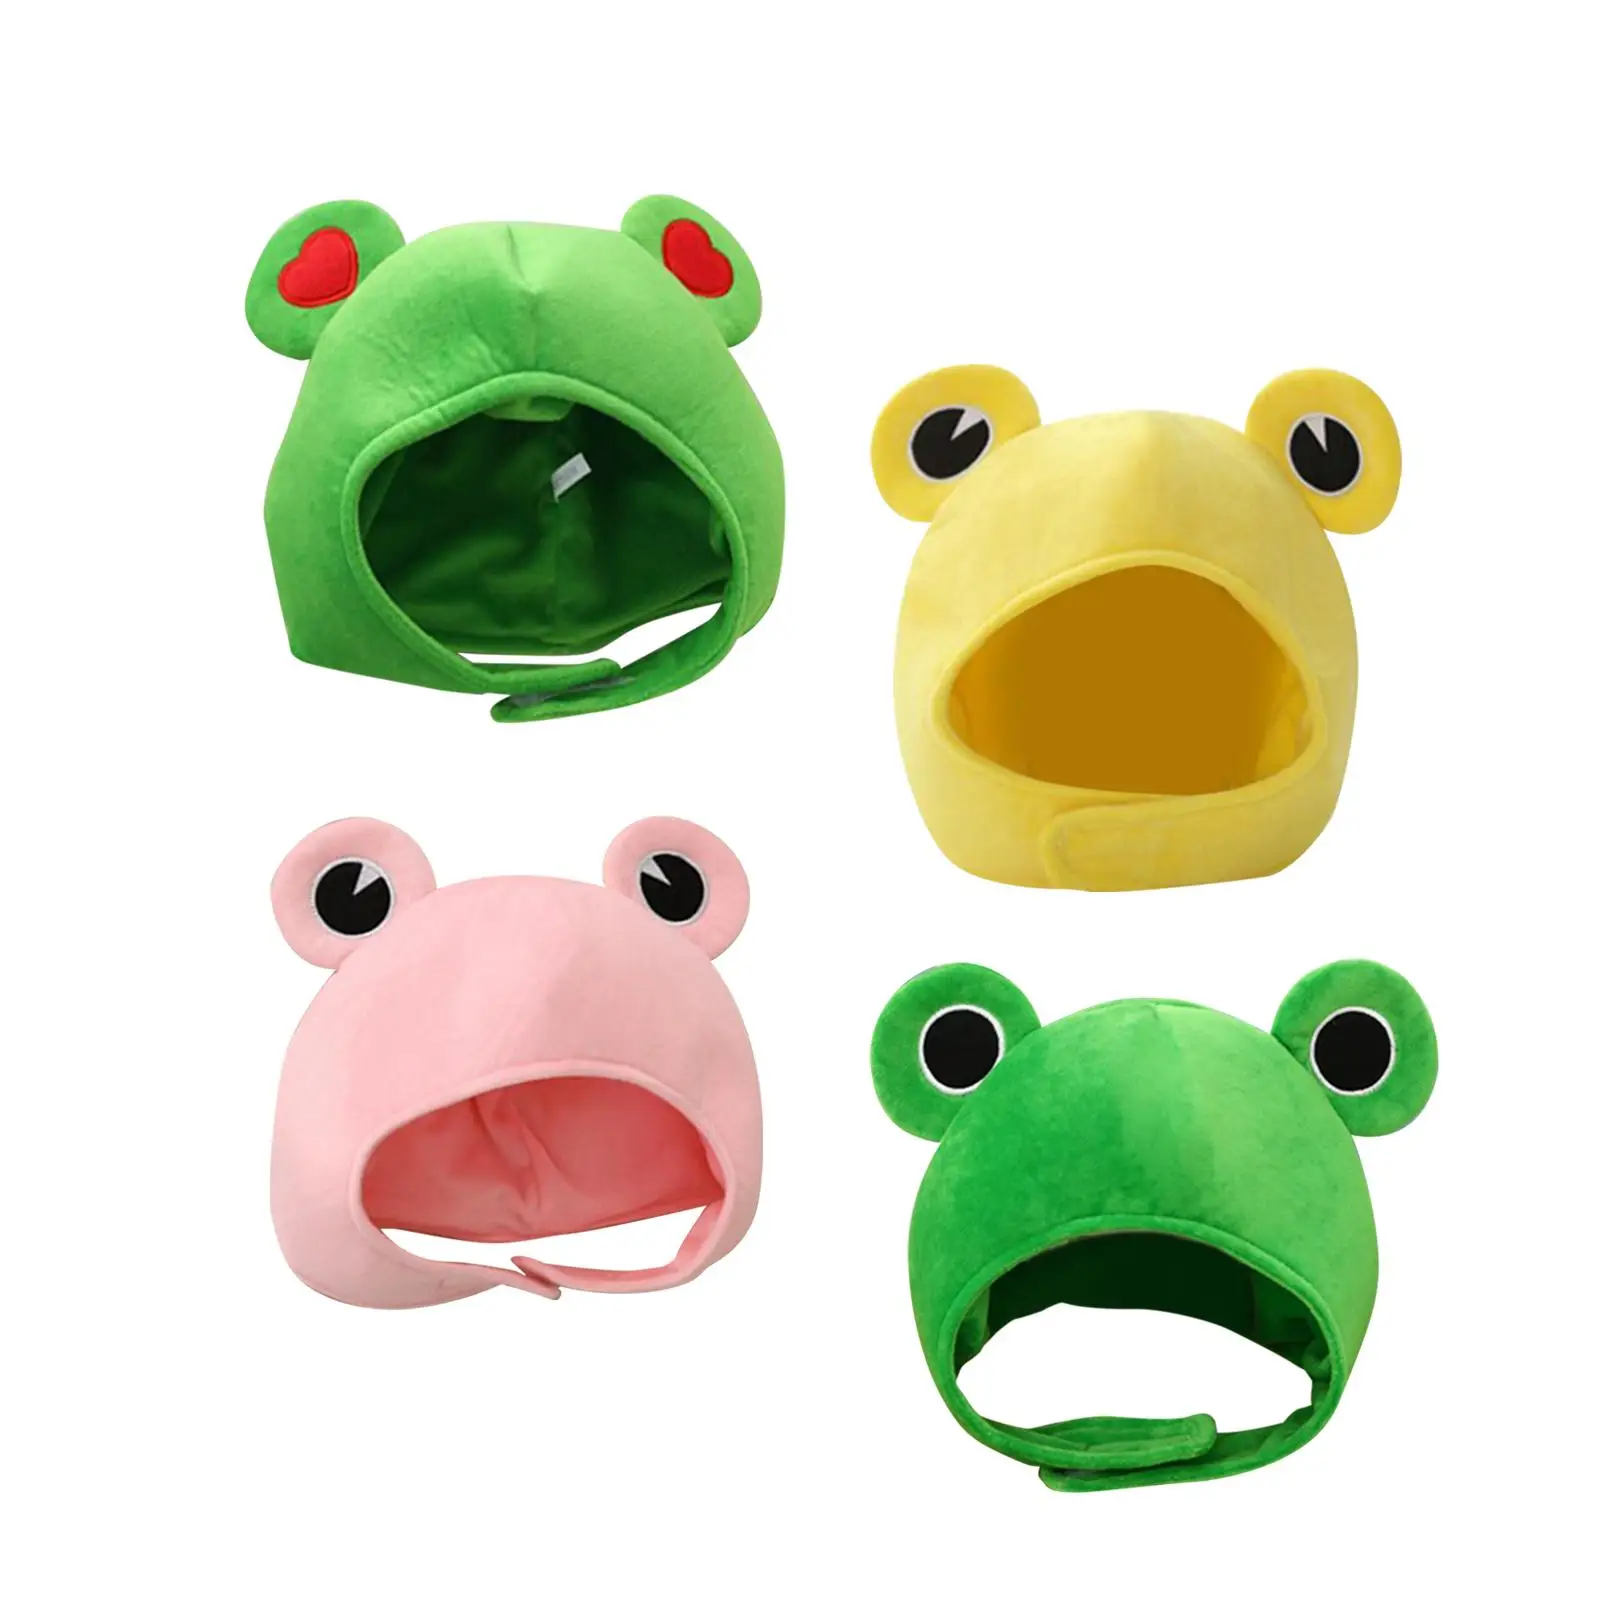 Novelty Plush Frog Hat Dress up Animal Cosplay Adults Cute Warm Photo Props Winter Headwear for Holiday Halloween Party Birthday